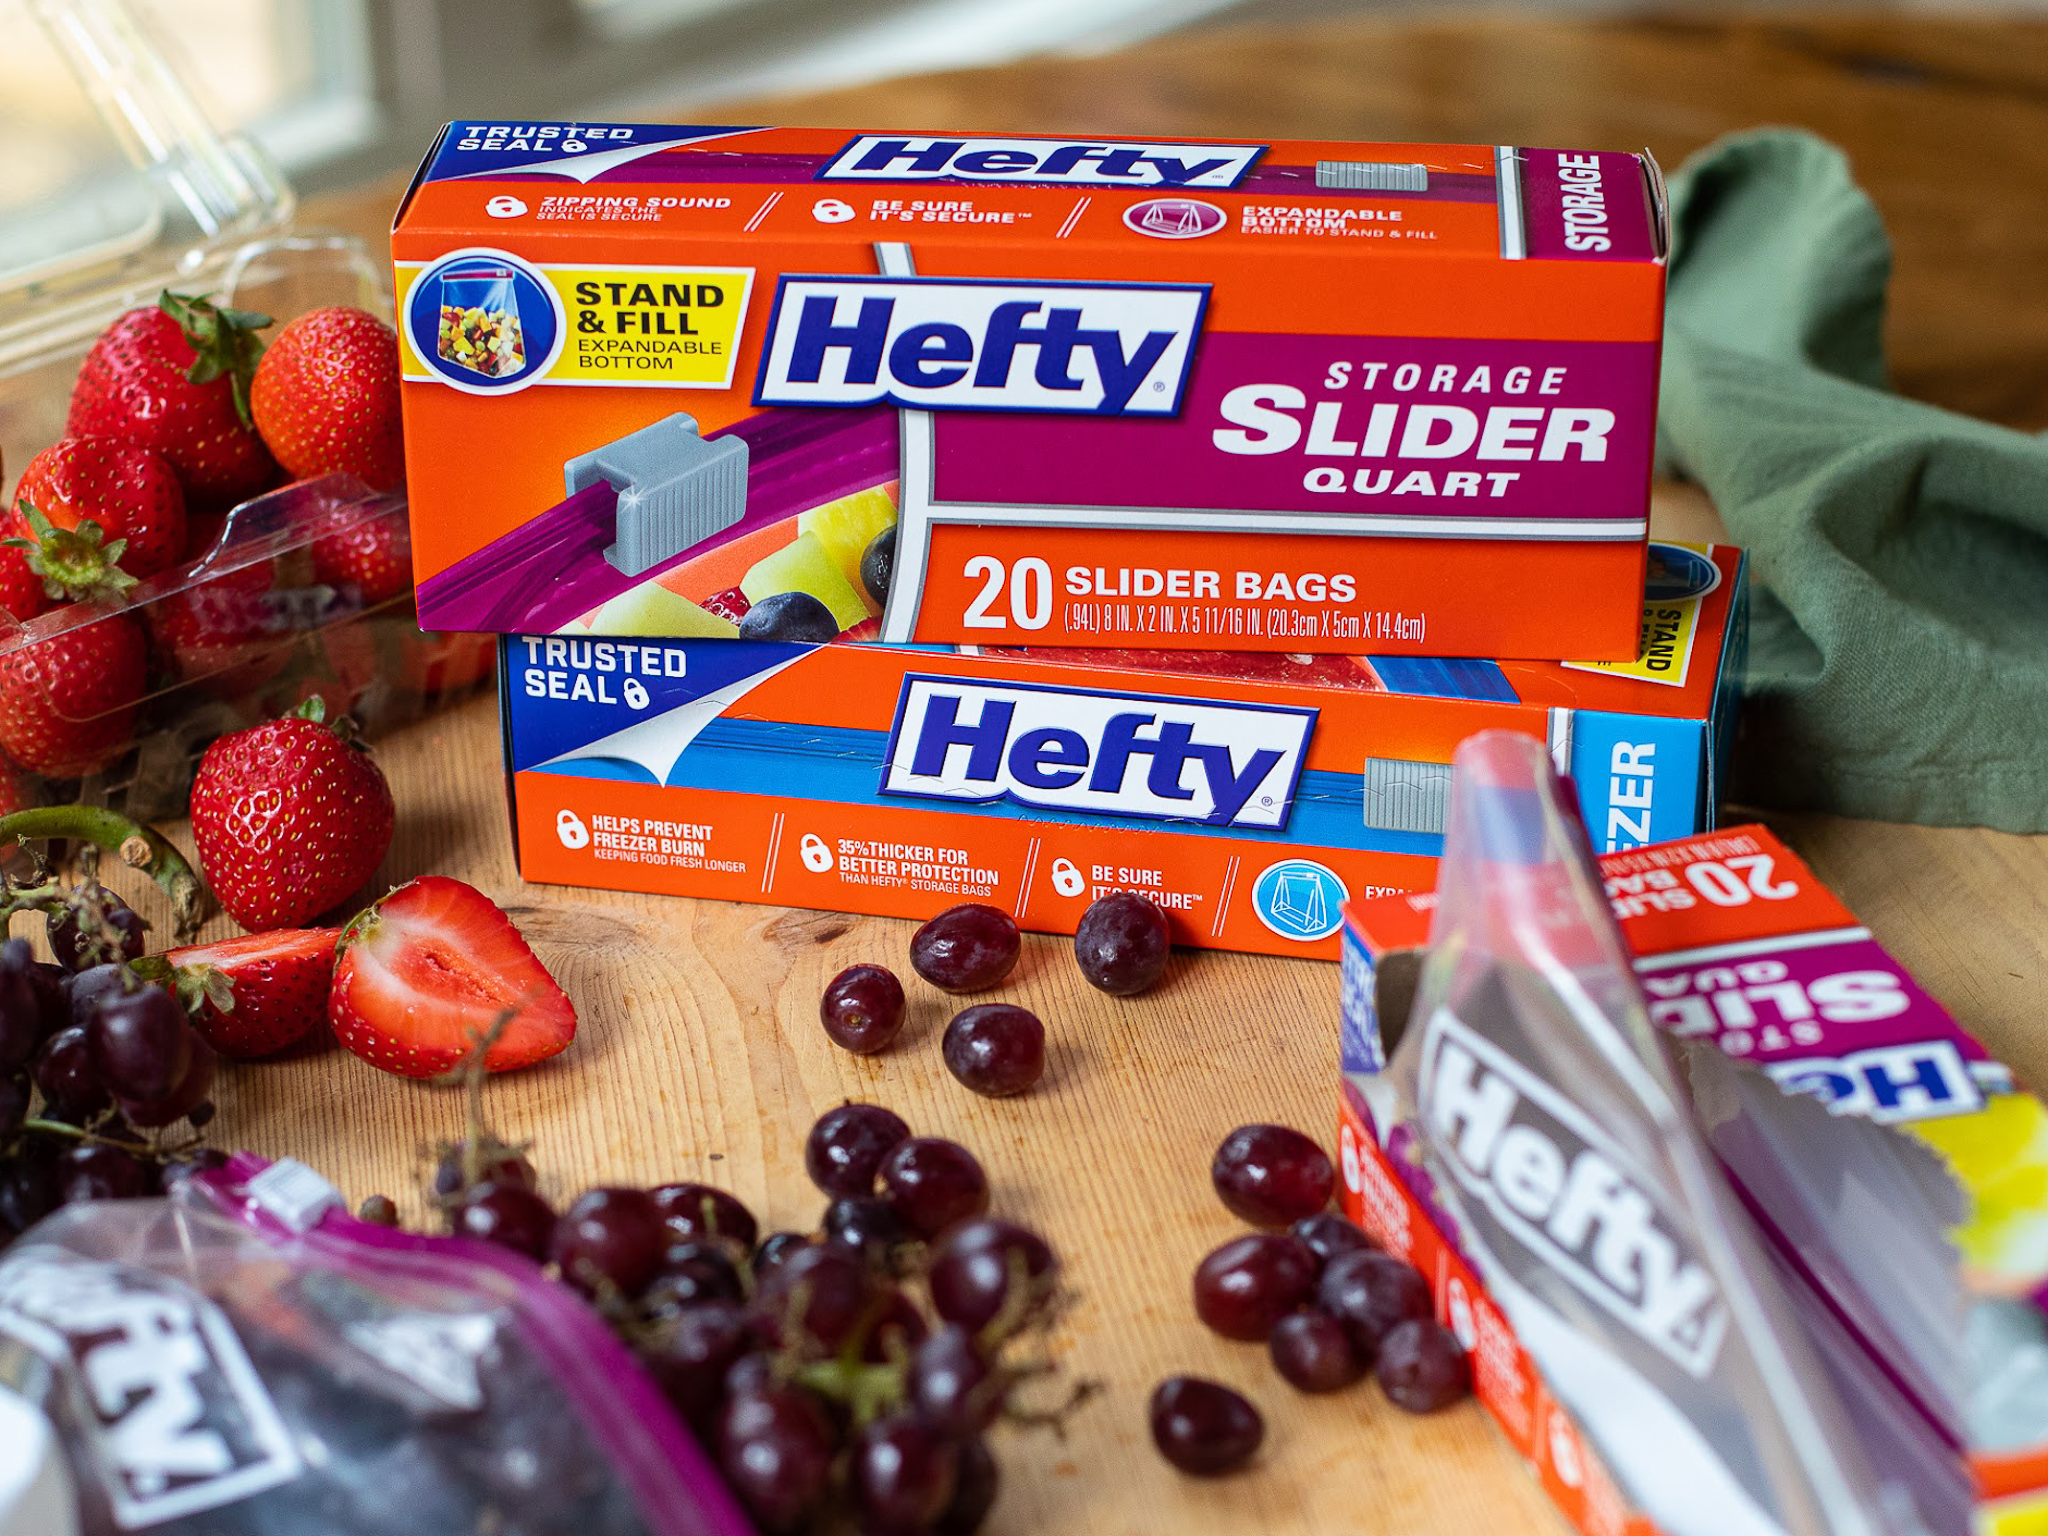 Load Your Coupon And Save On Hefty® Slider Bags At Publix – $2